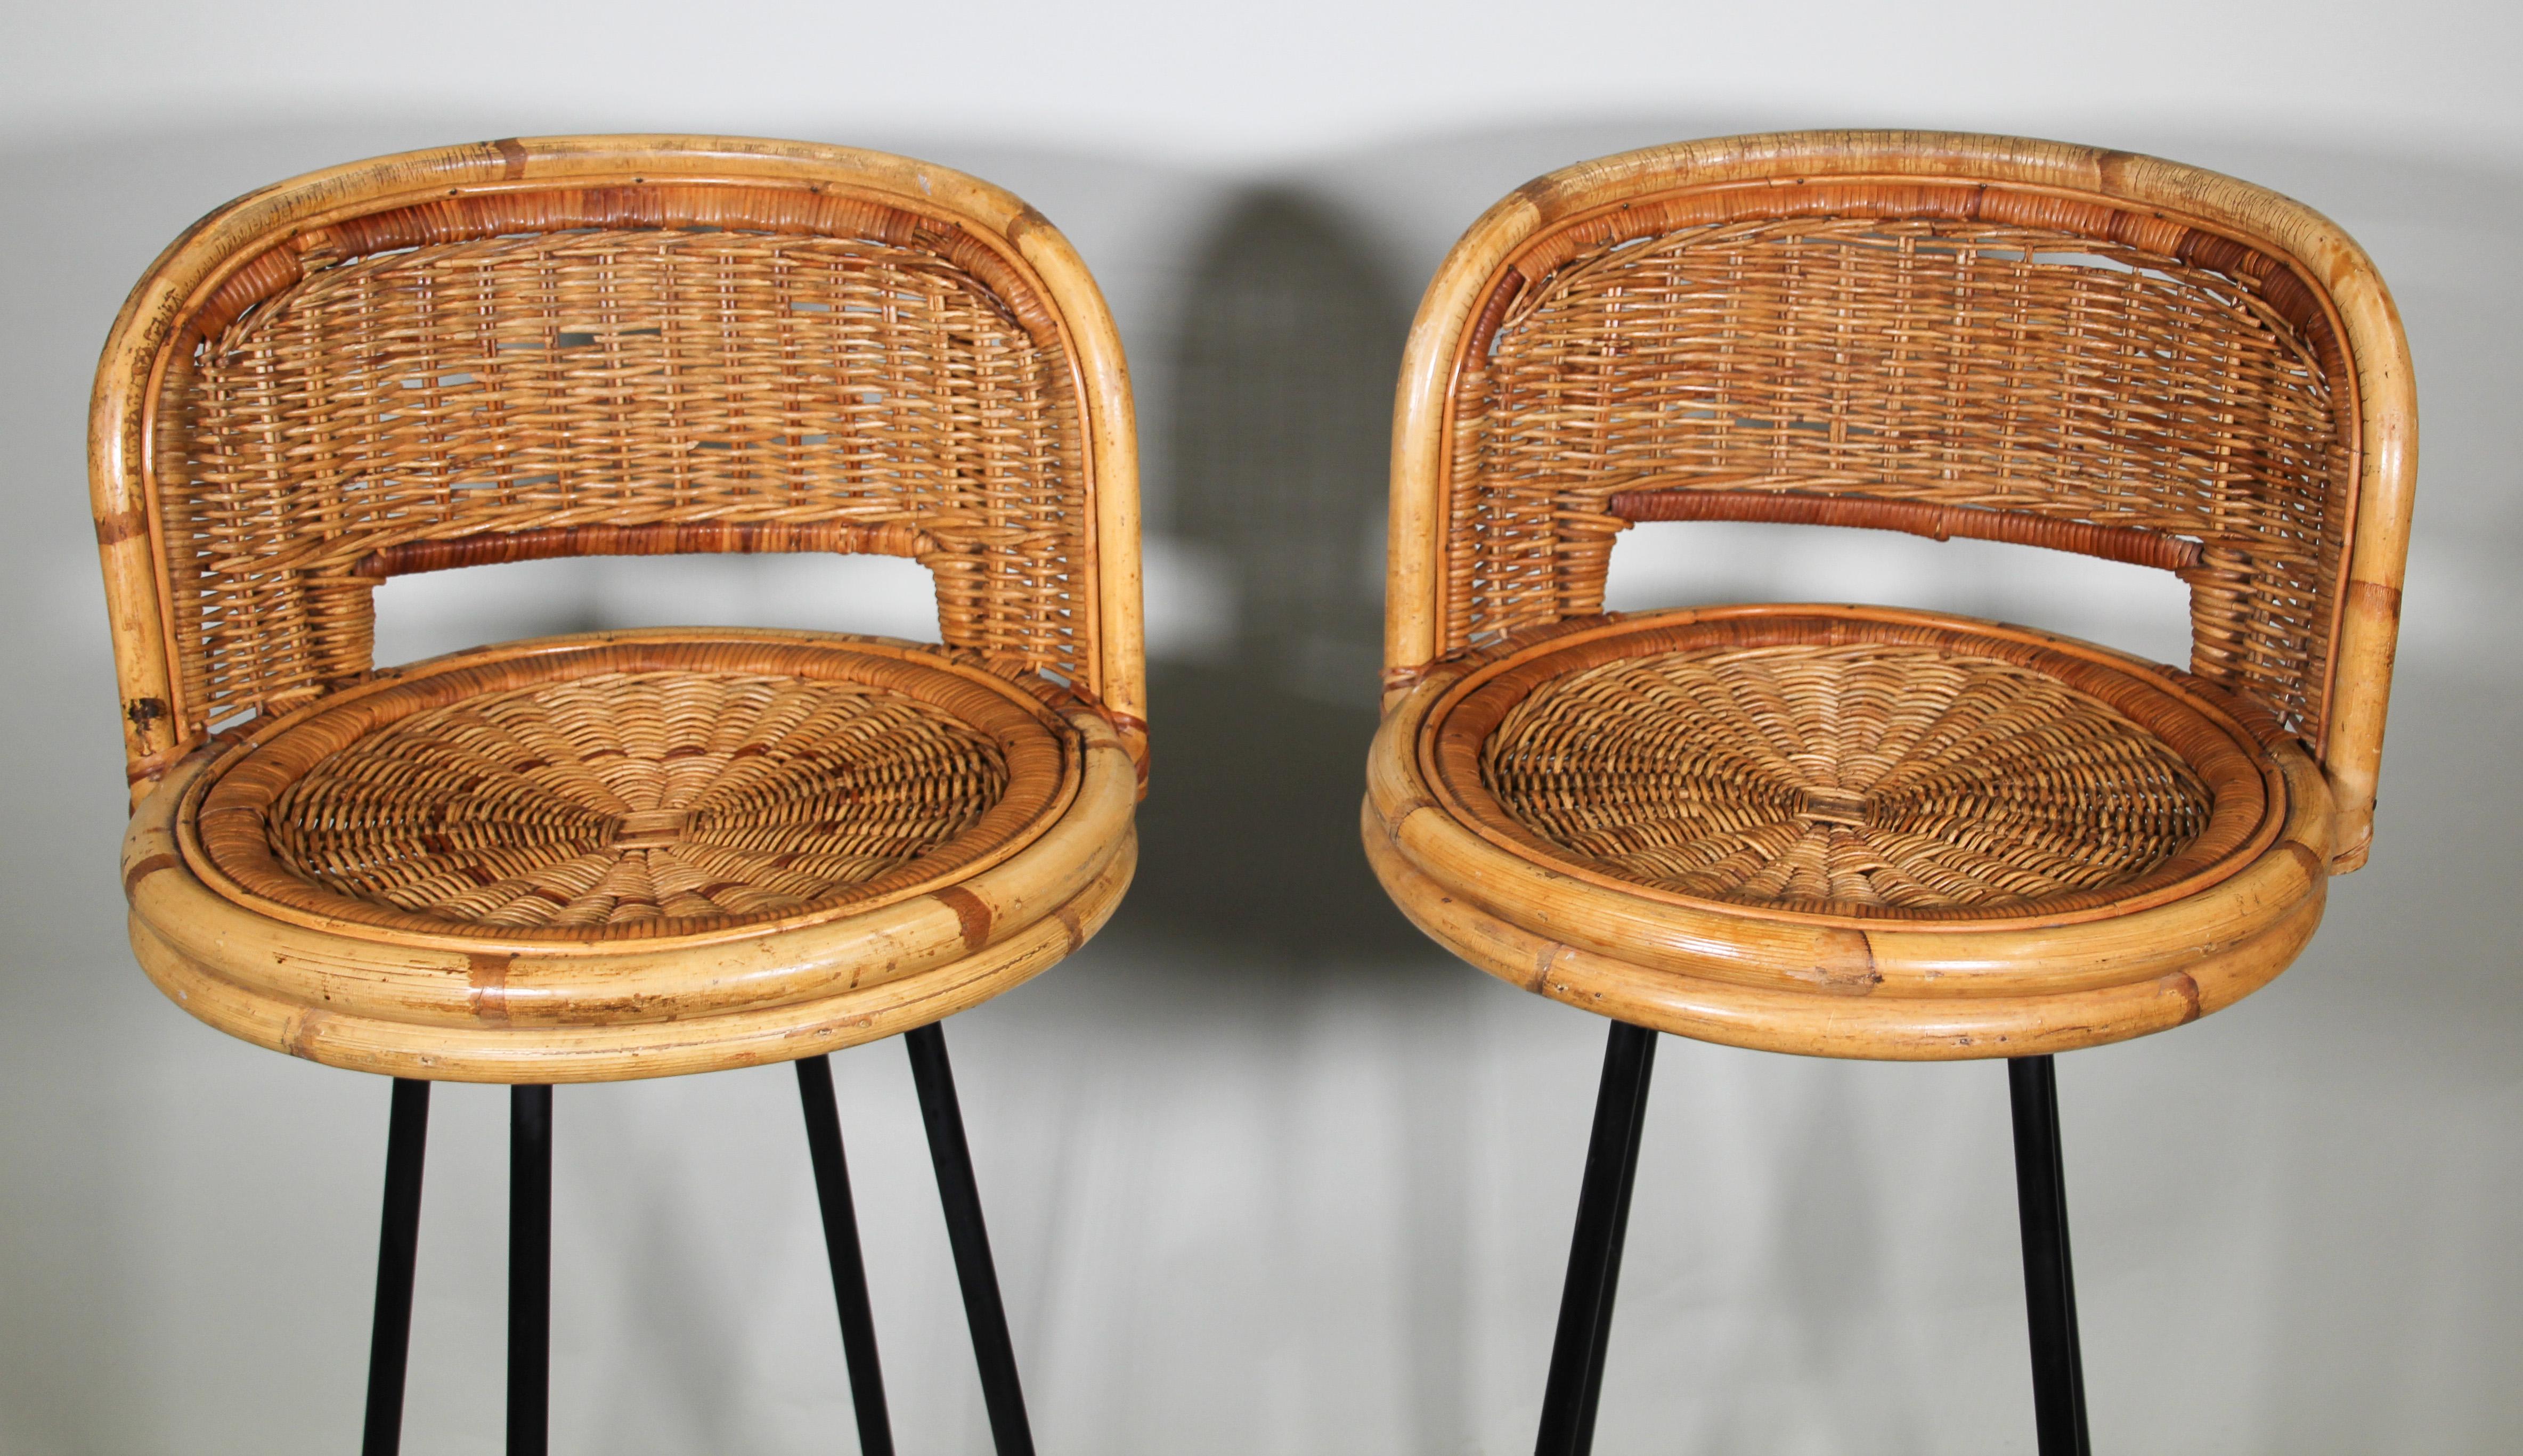 Vintage wrought iron swivel base rattan wicker bar stools in the style of Danny Ho Fong.
Black coated iron a frame built of 4 tall very thin round section splayed legs and a foot ring.
Woven rattan bucket chairs with black iron frame, swivel round